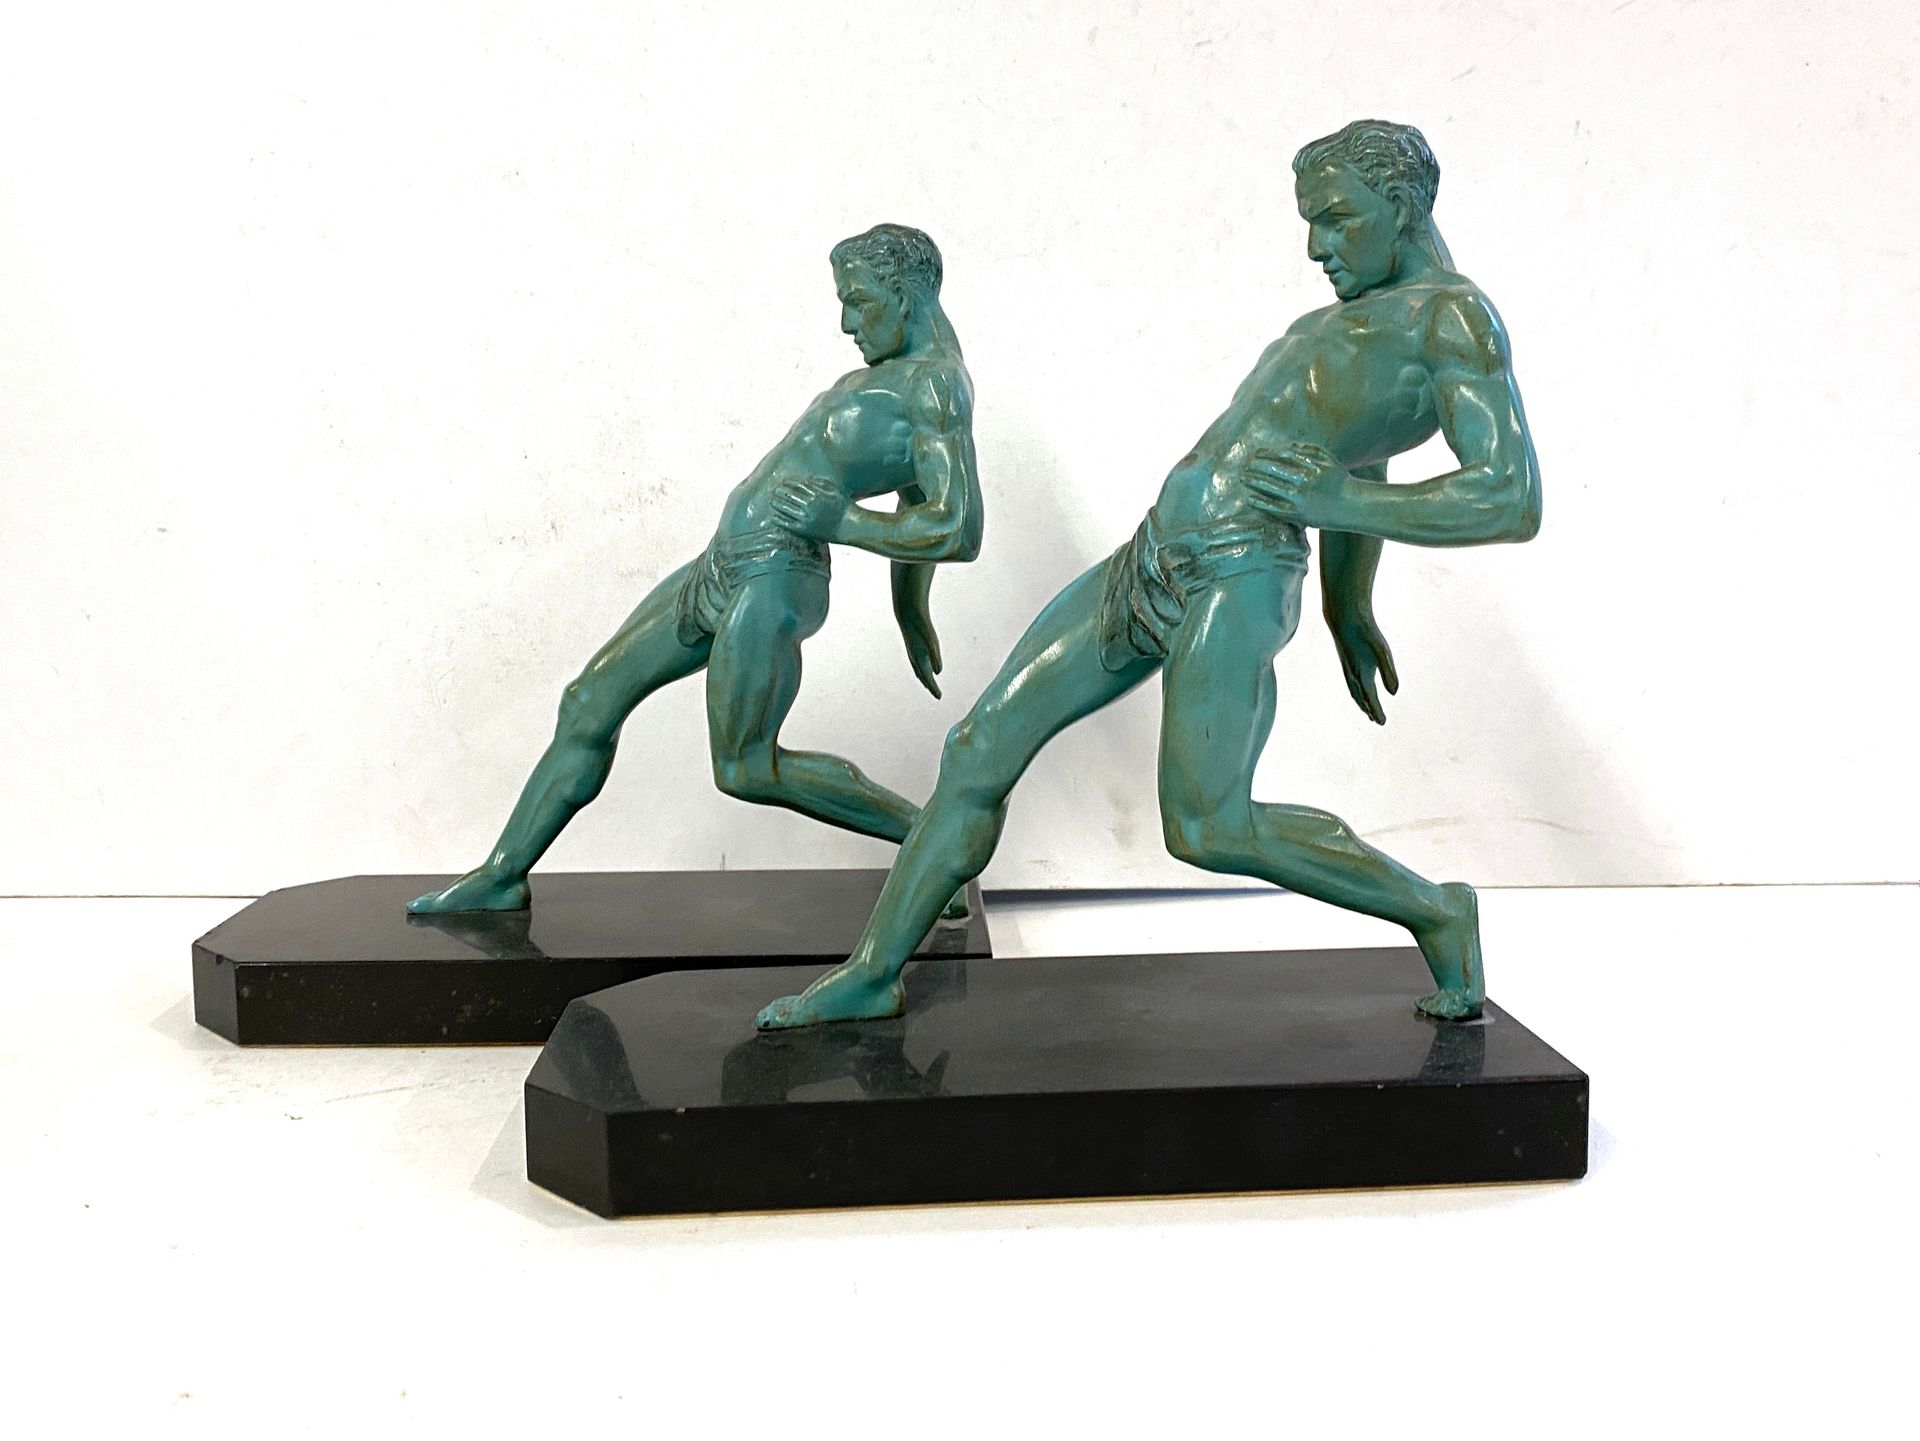 Null R. VRAMANT

Pair of bookends in bronze with green patina on a black marble &hellip;